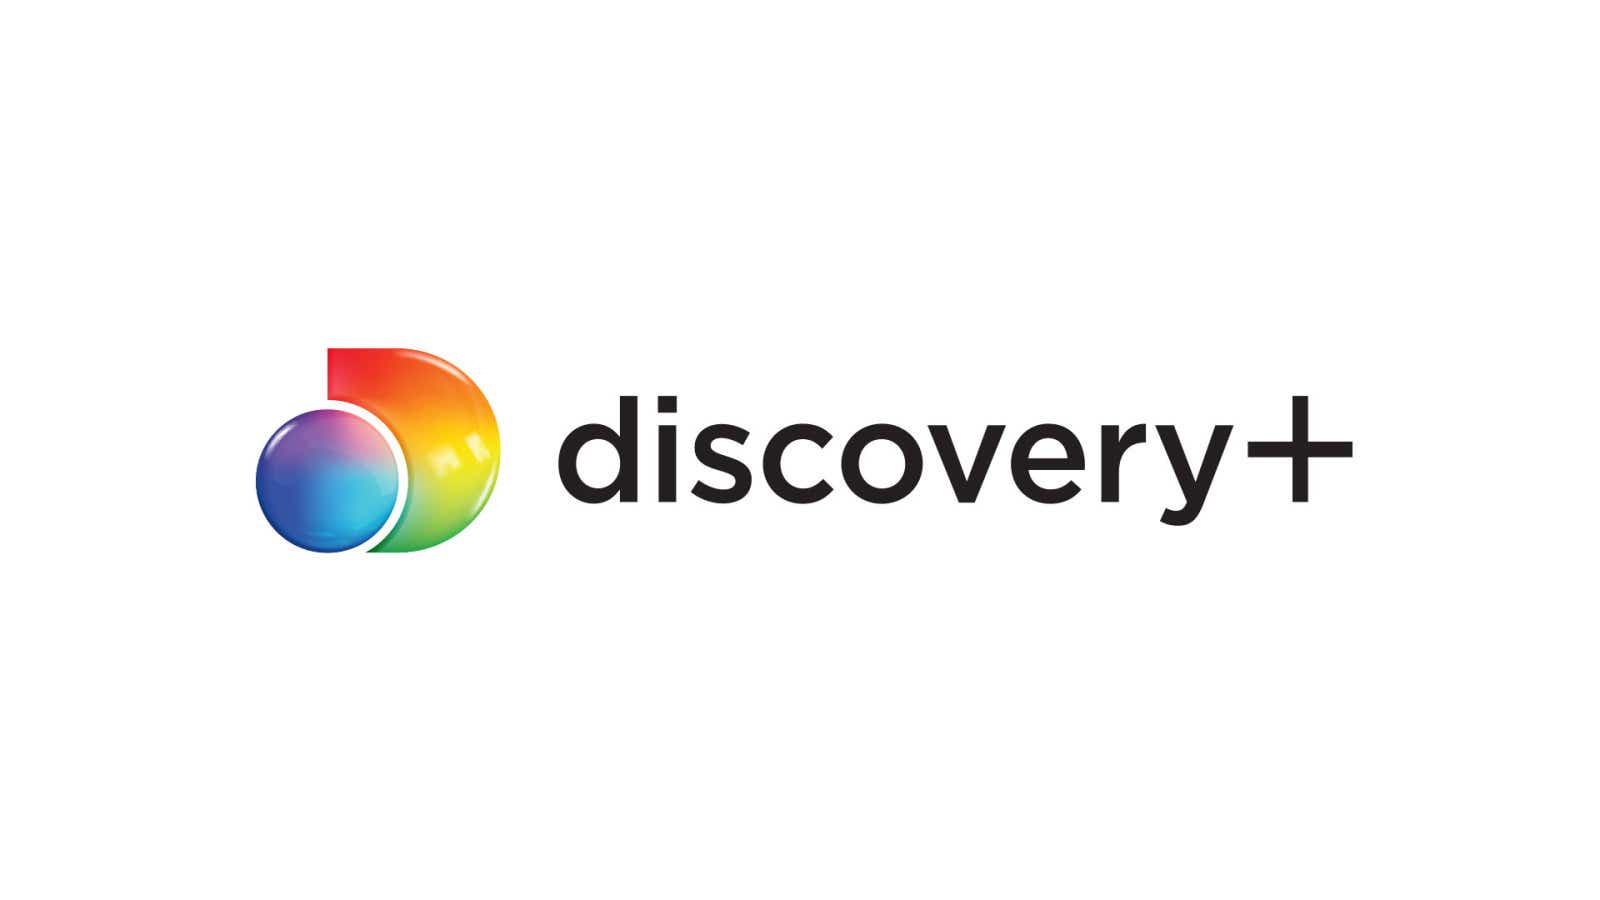 What to Watch on Discovery Plus